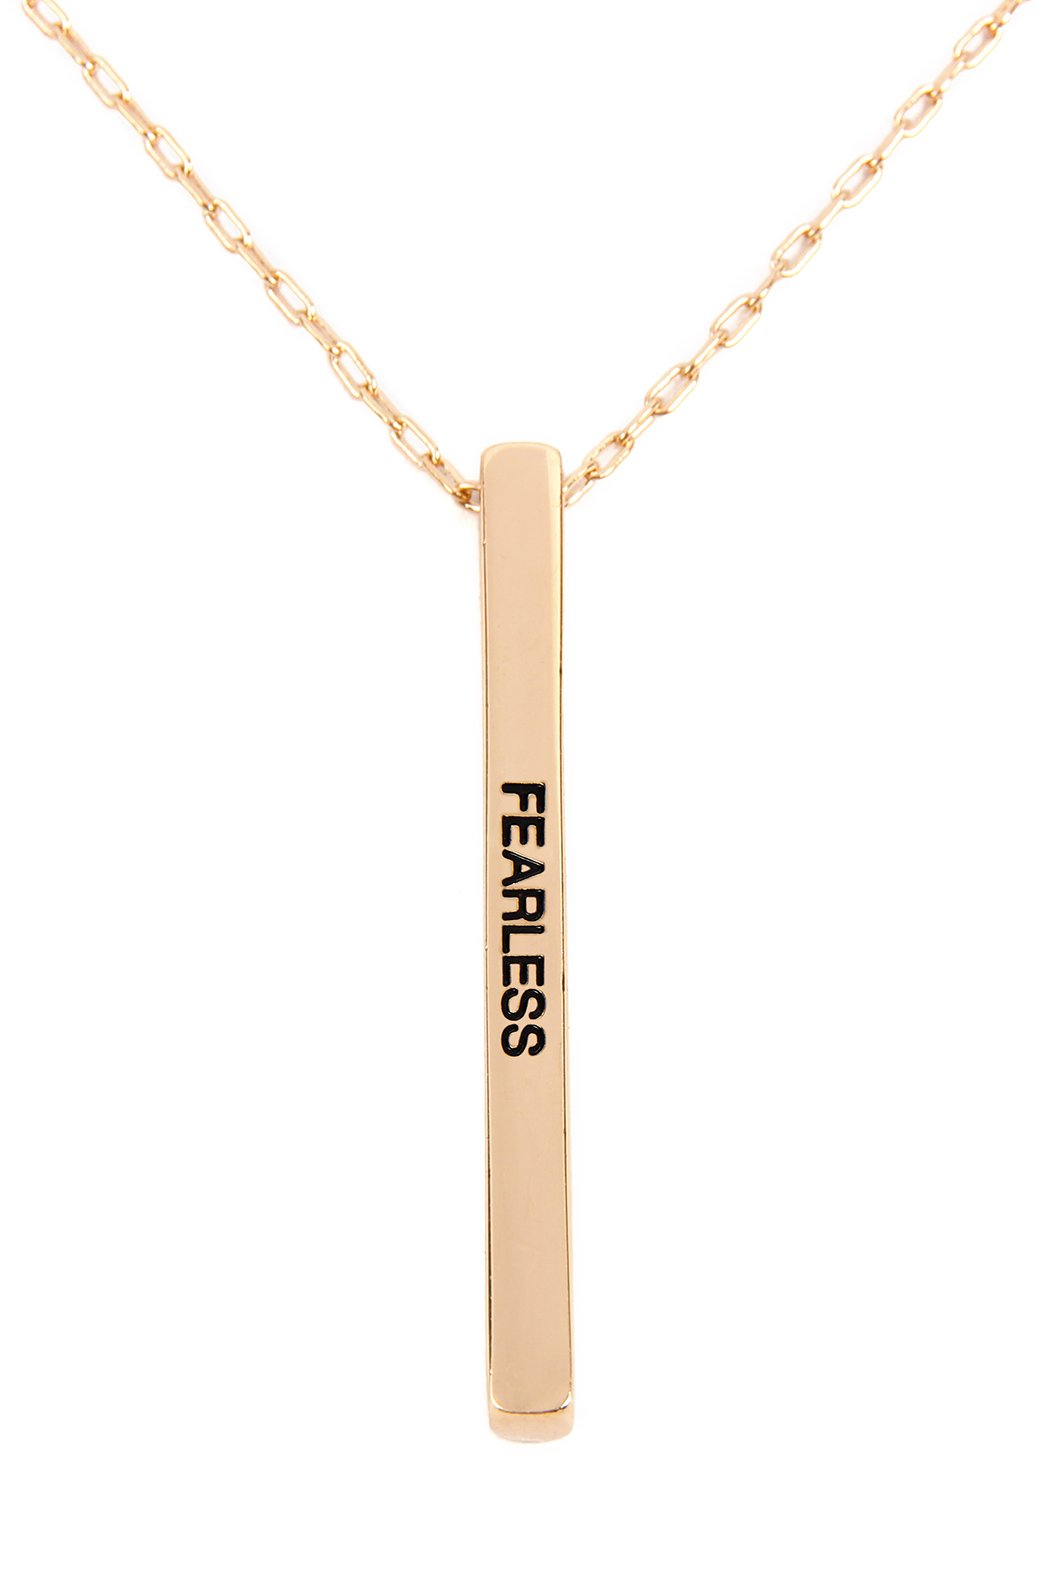 B3n2164fe - "Fearless" Metal Bar Pendant Chain Necklace - LOLA LUXE